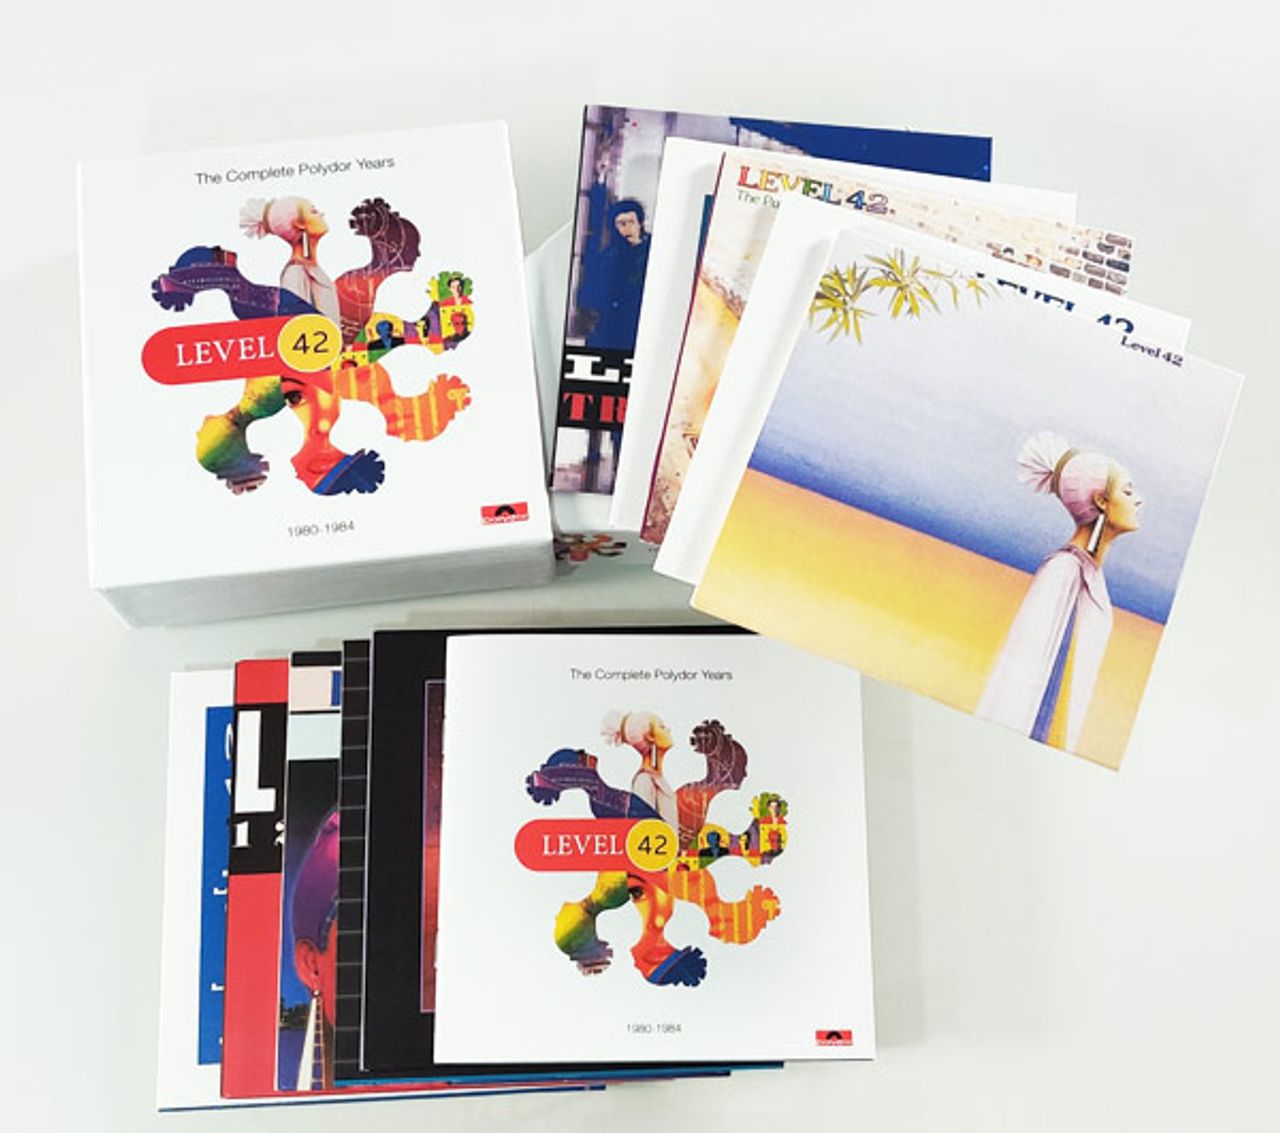 Level 42 The Complete Polydor Years 1980-1984 Sealed UK Cd album box — 